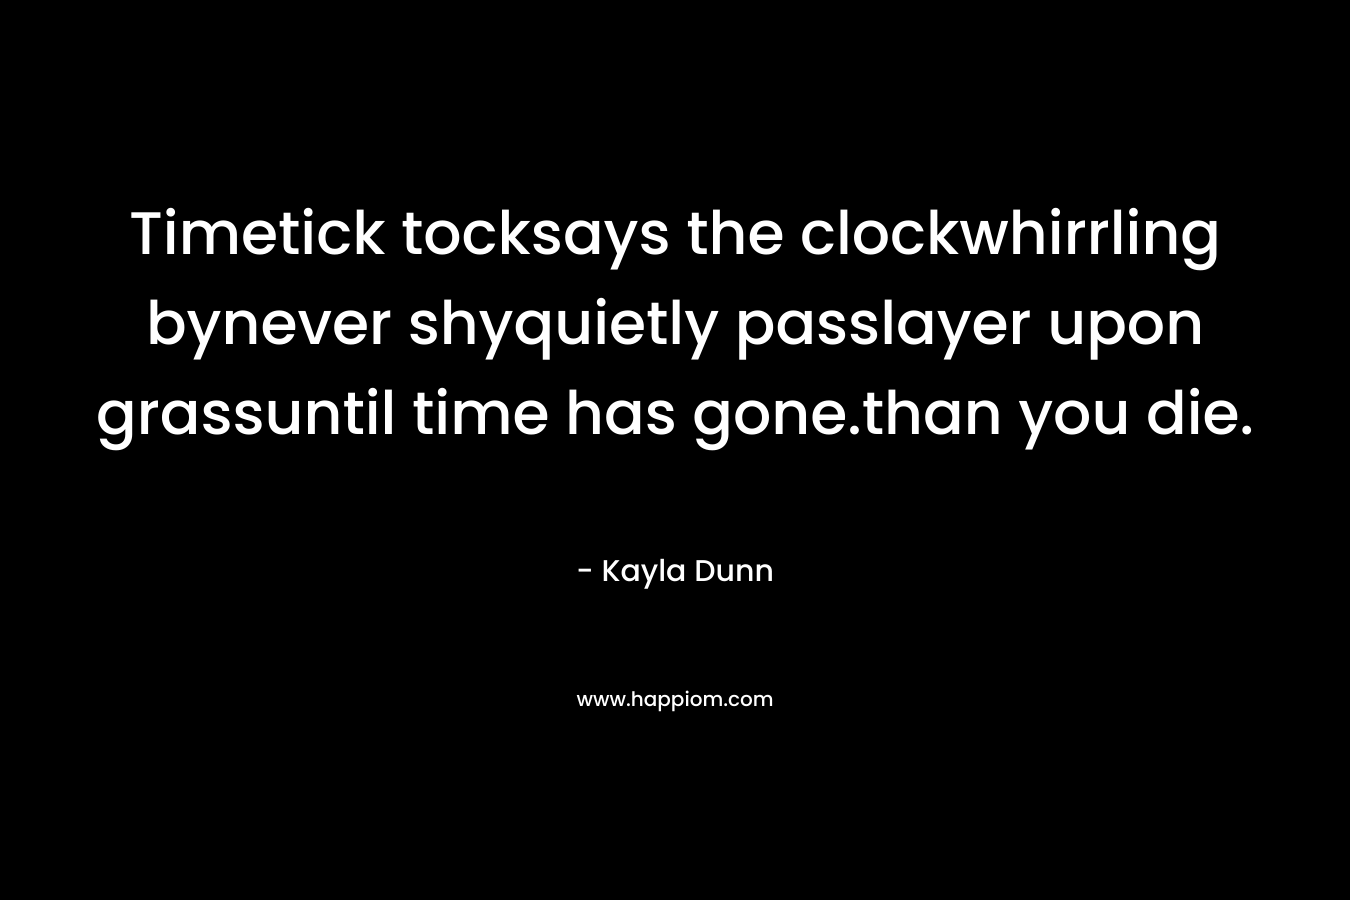 Timetick tocksays the clockwhirrling bynever shyquietly passlayer upon grassuntil time has gone.than you die.